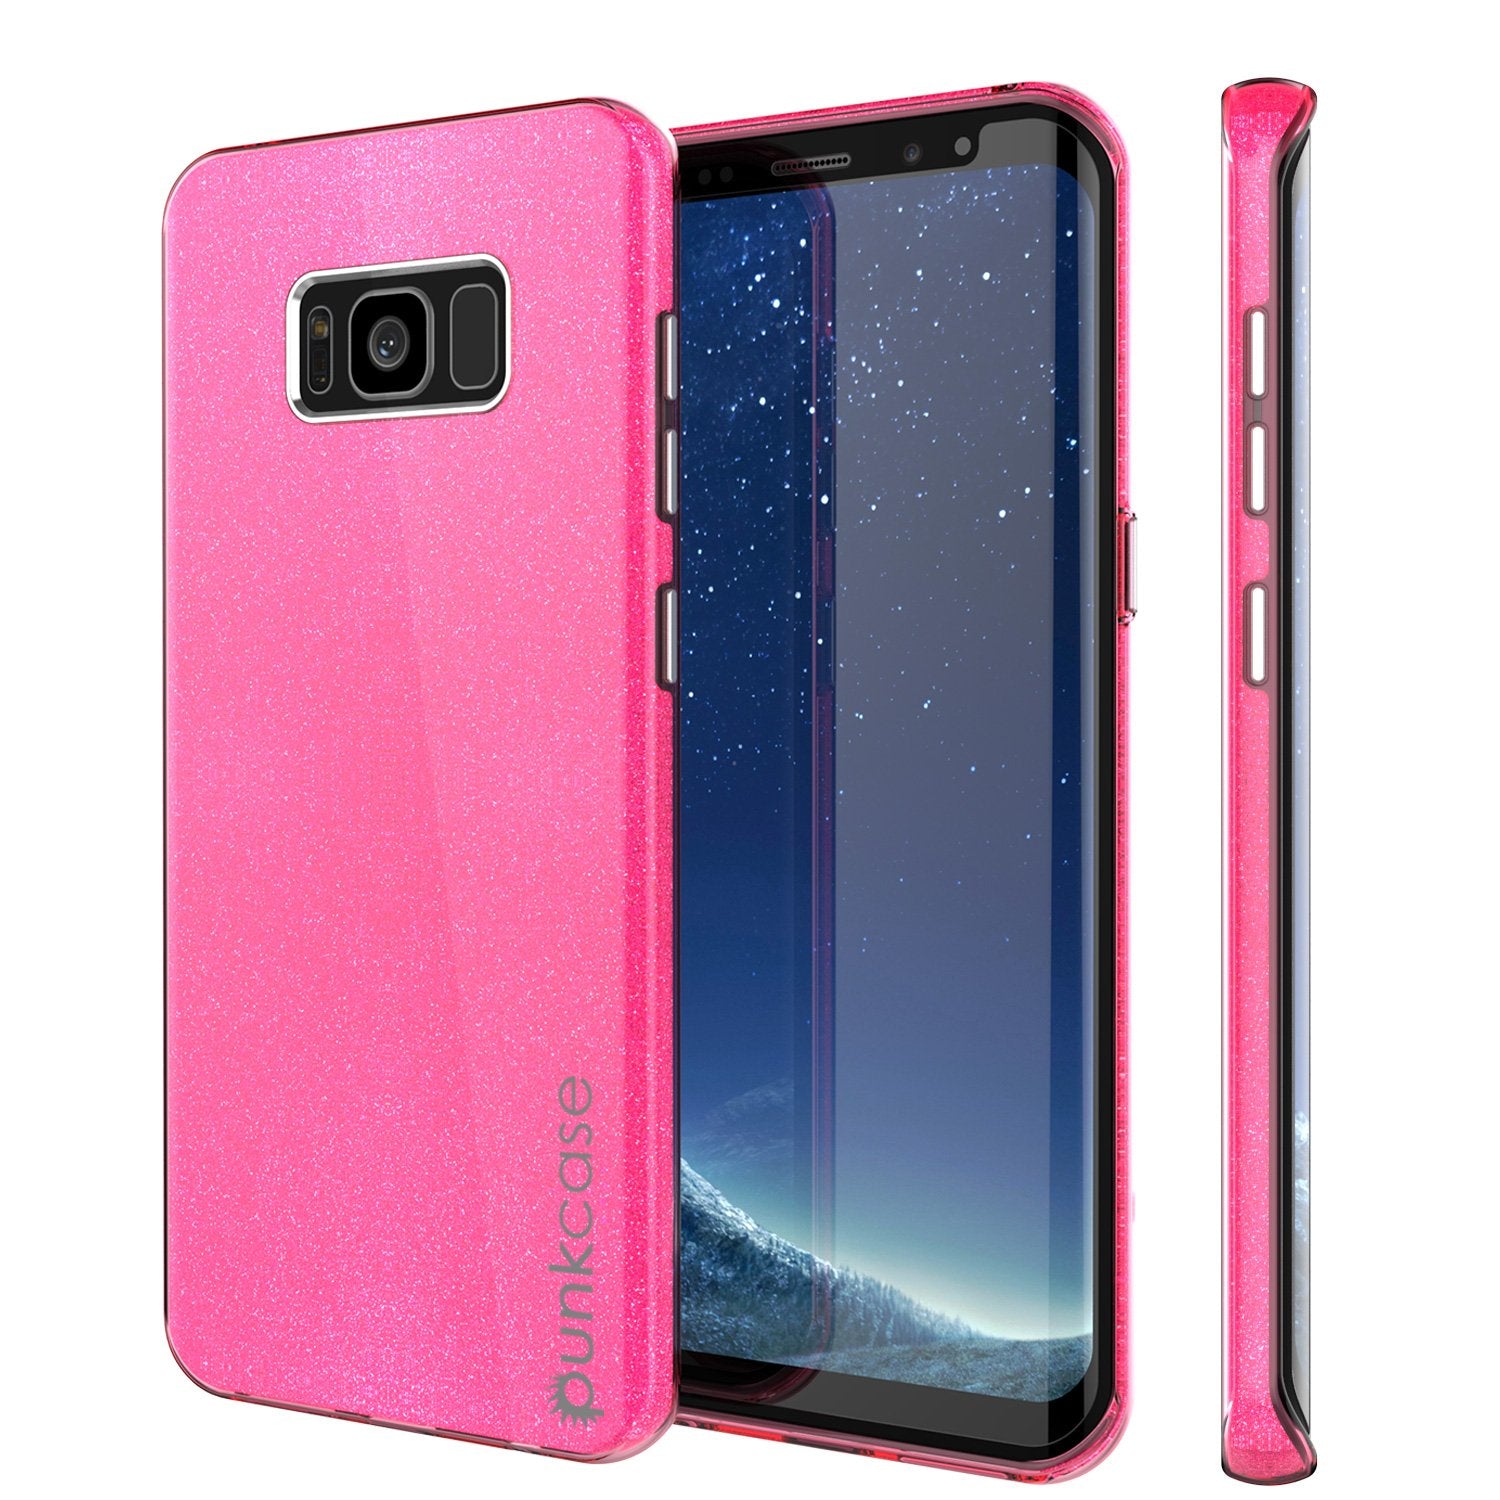 Galaxy S8 Case, Punkcase Galactic 2.0 Series Ultra Slim Protective Armor TPU Cover w/ PunkShield Screen Protector | Lifetime Exchange Warranty | Designed for Samsung Galaxy S8 [Pink]